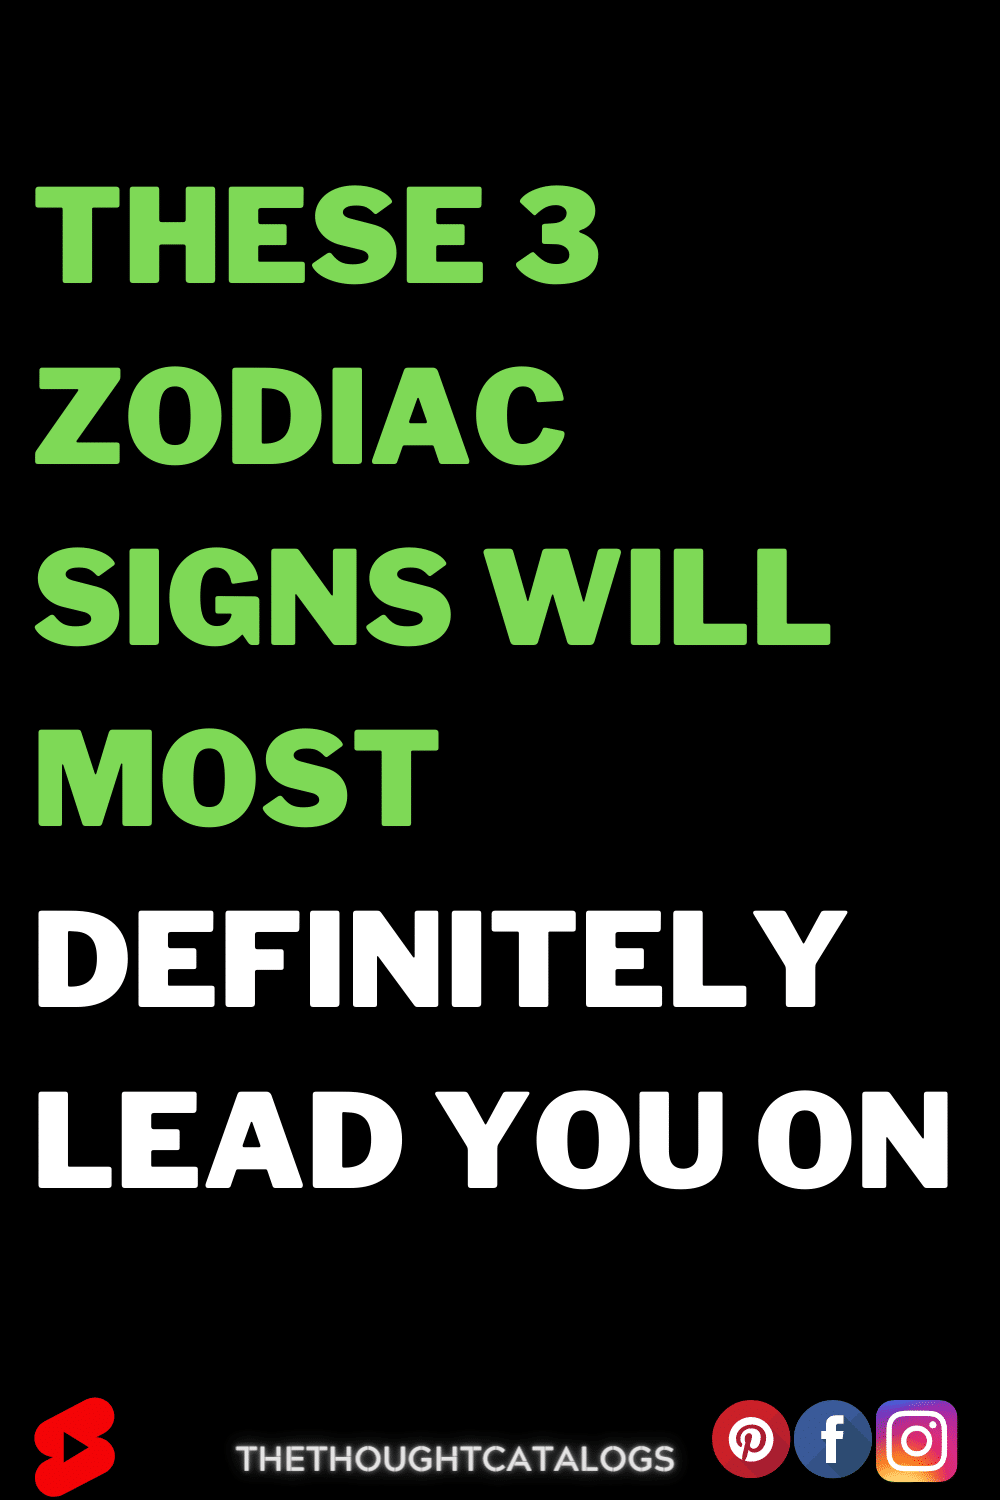 These 3 Zodiac Signs Will Most Definitely Lead You On